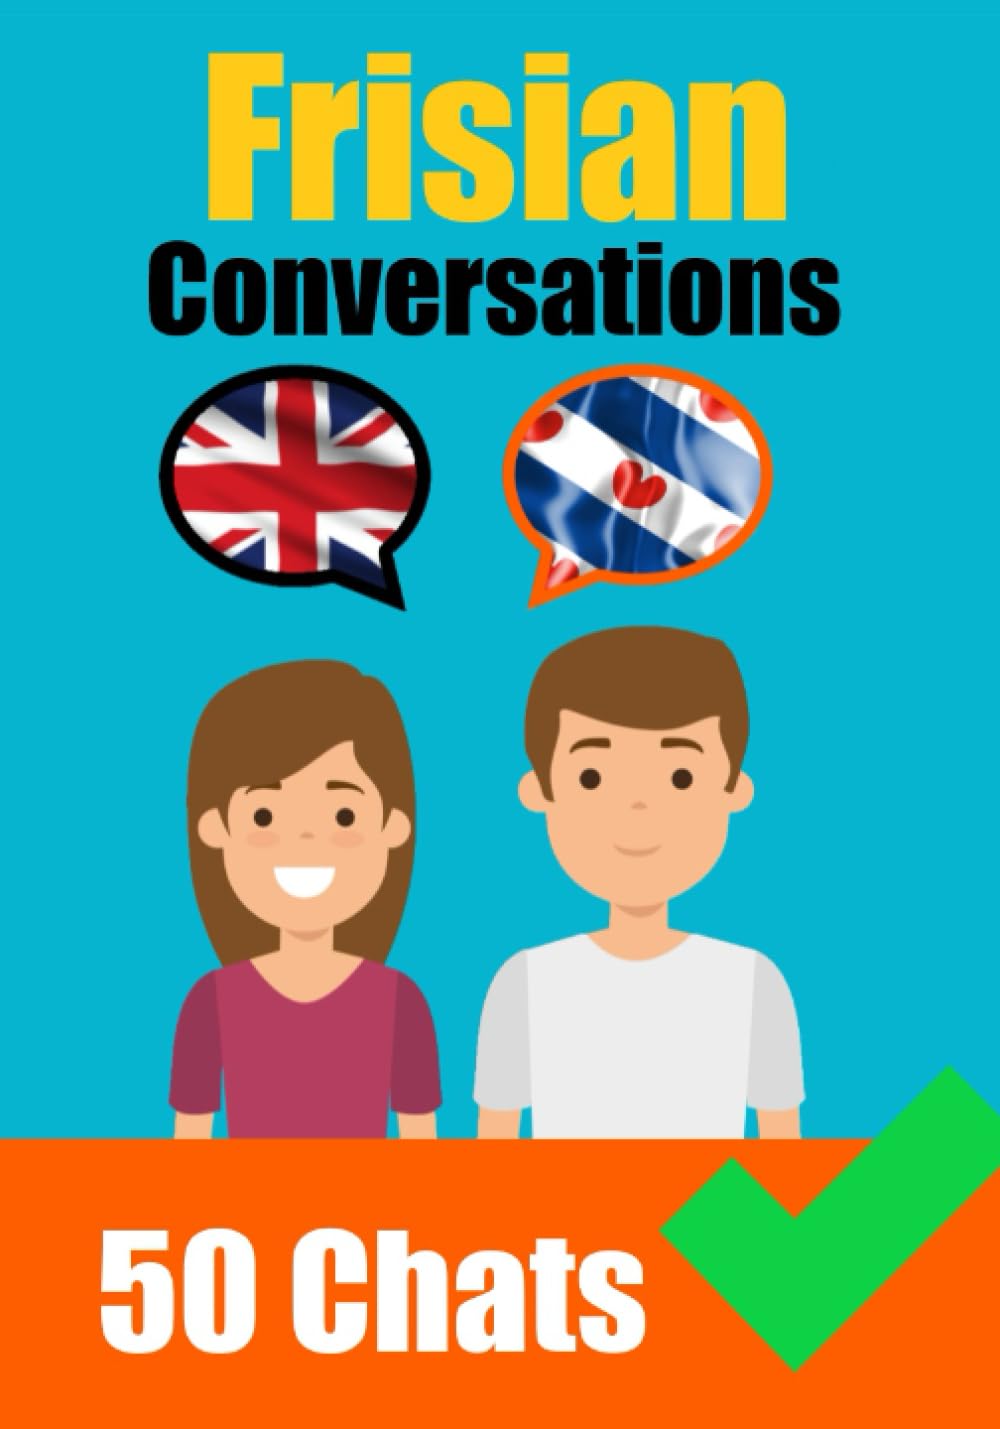 Conversations in Frisian | English and Frisian Conversations Side by Side - Skriuwer.com